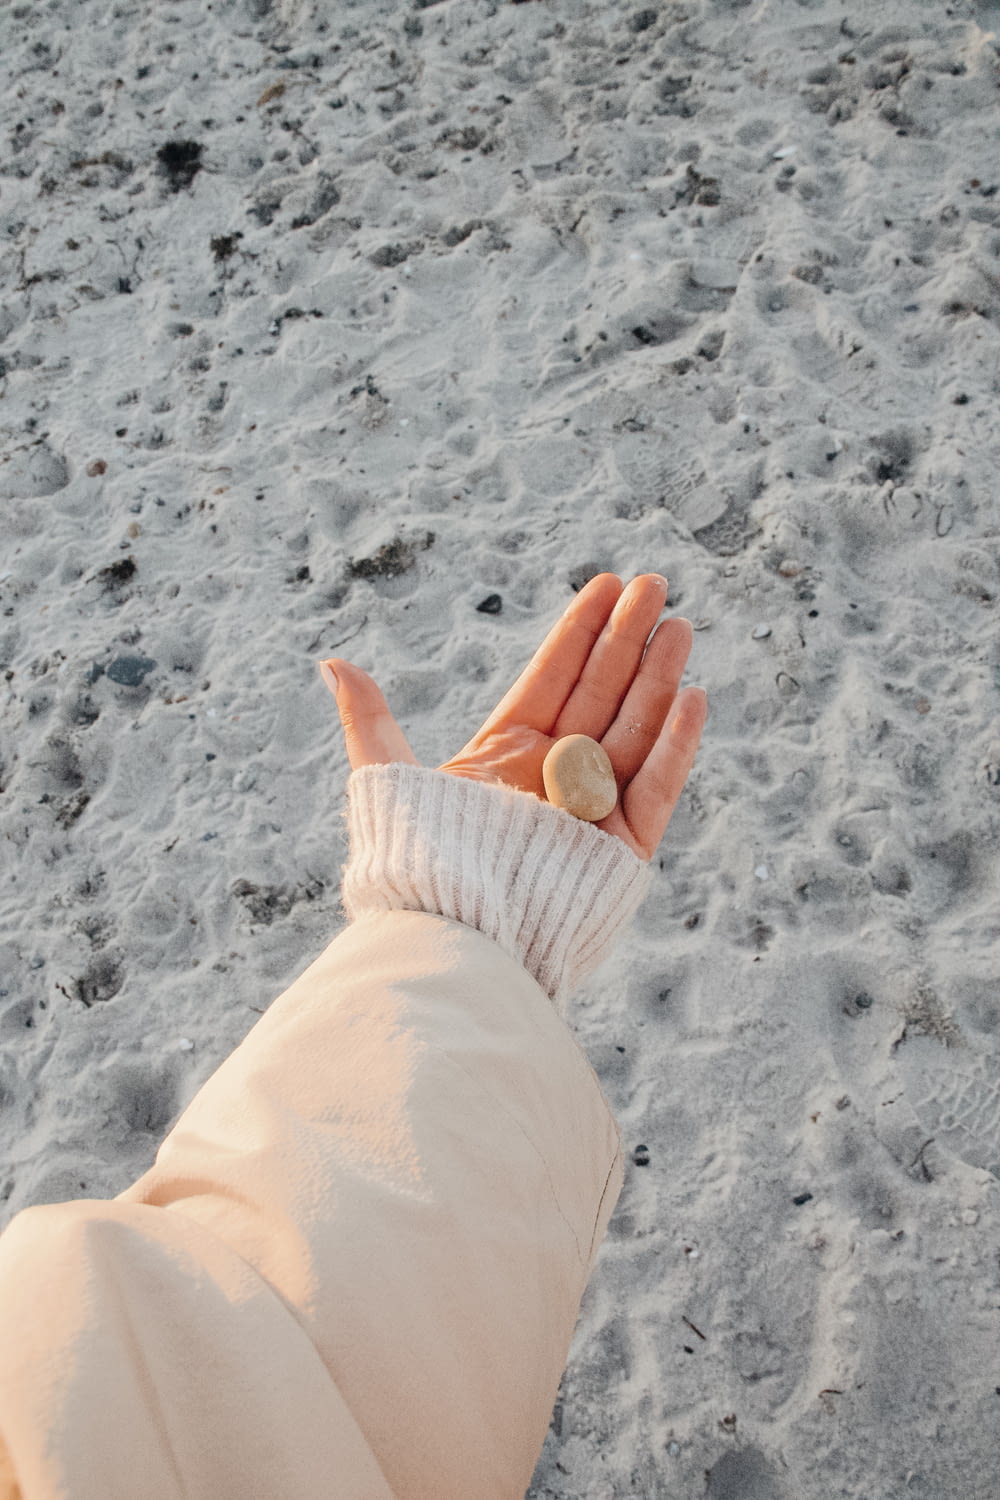 a person's hand holding a small object in the sand